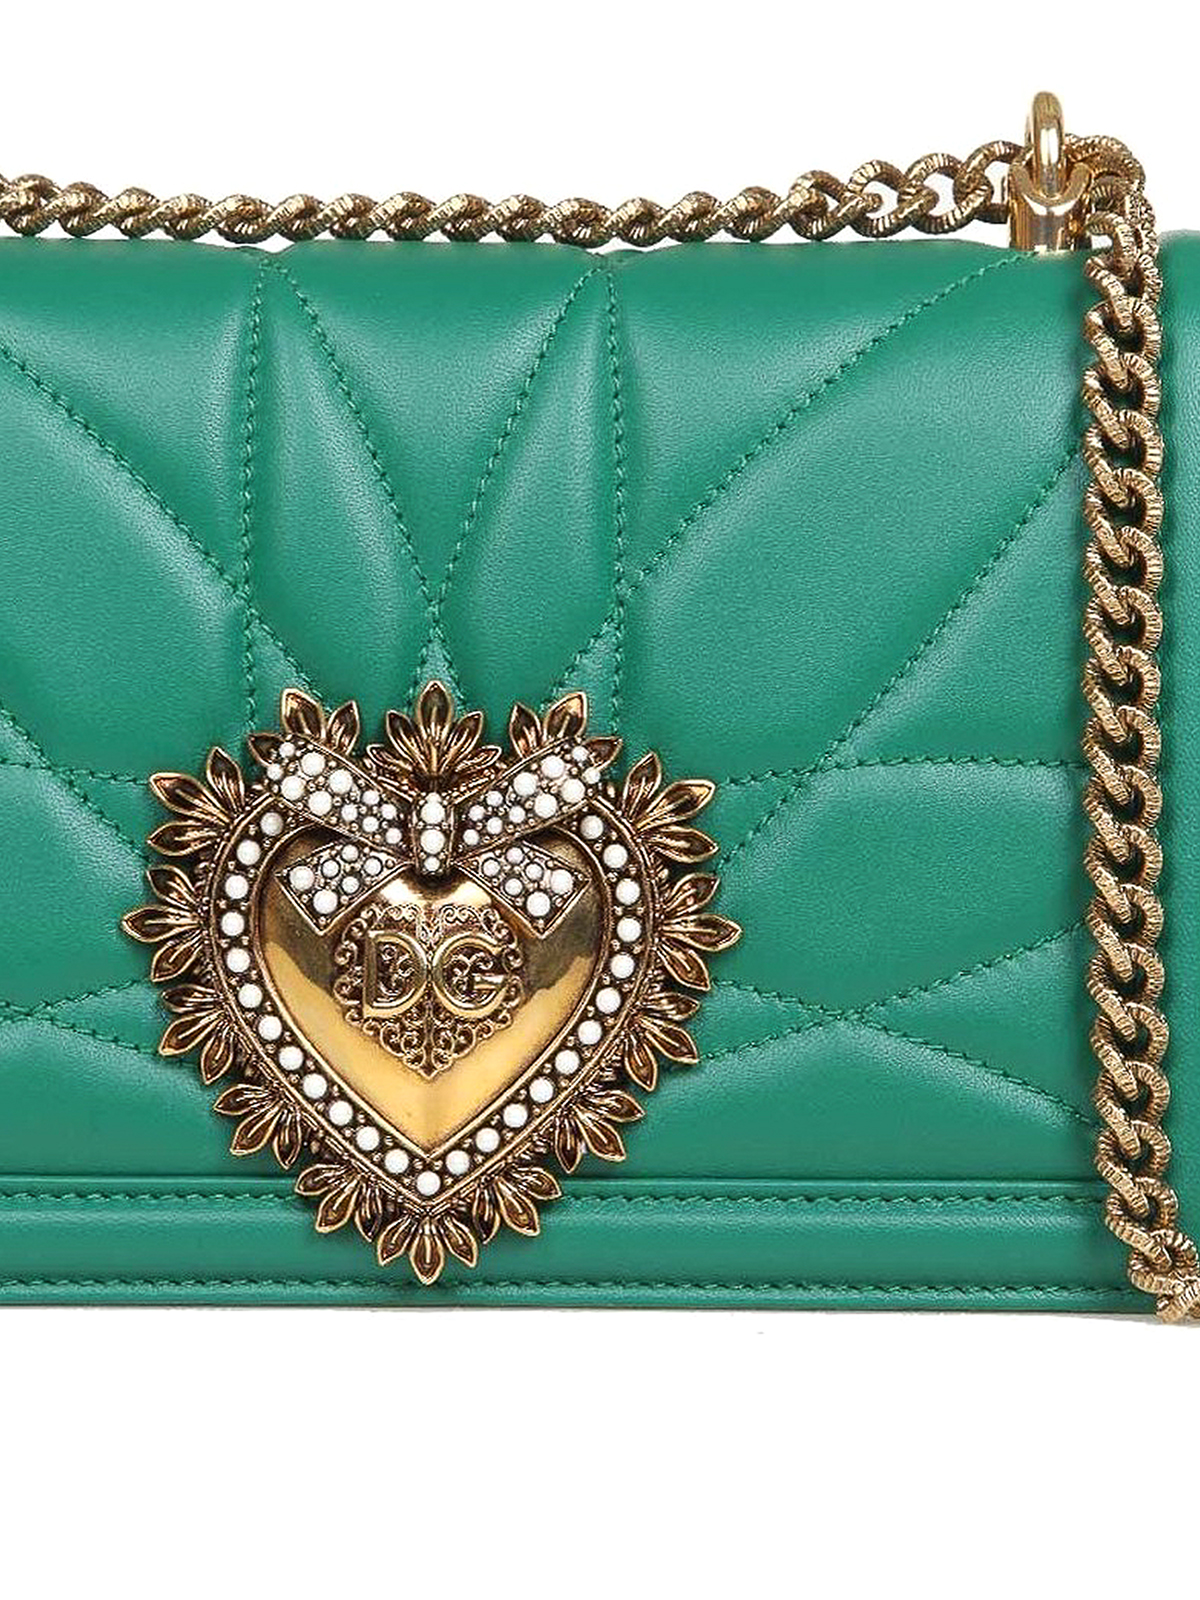 DOLCE & GABBANA DEVOTION QUILTED LEATHER BAG